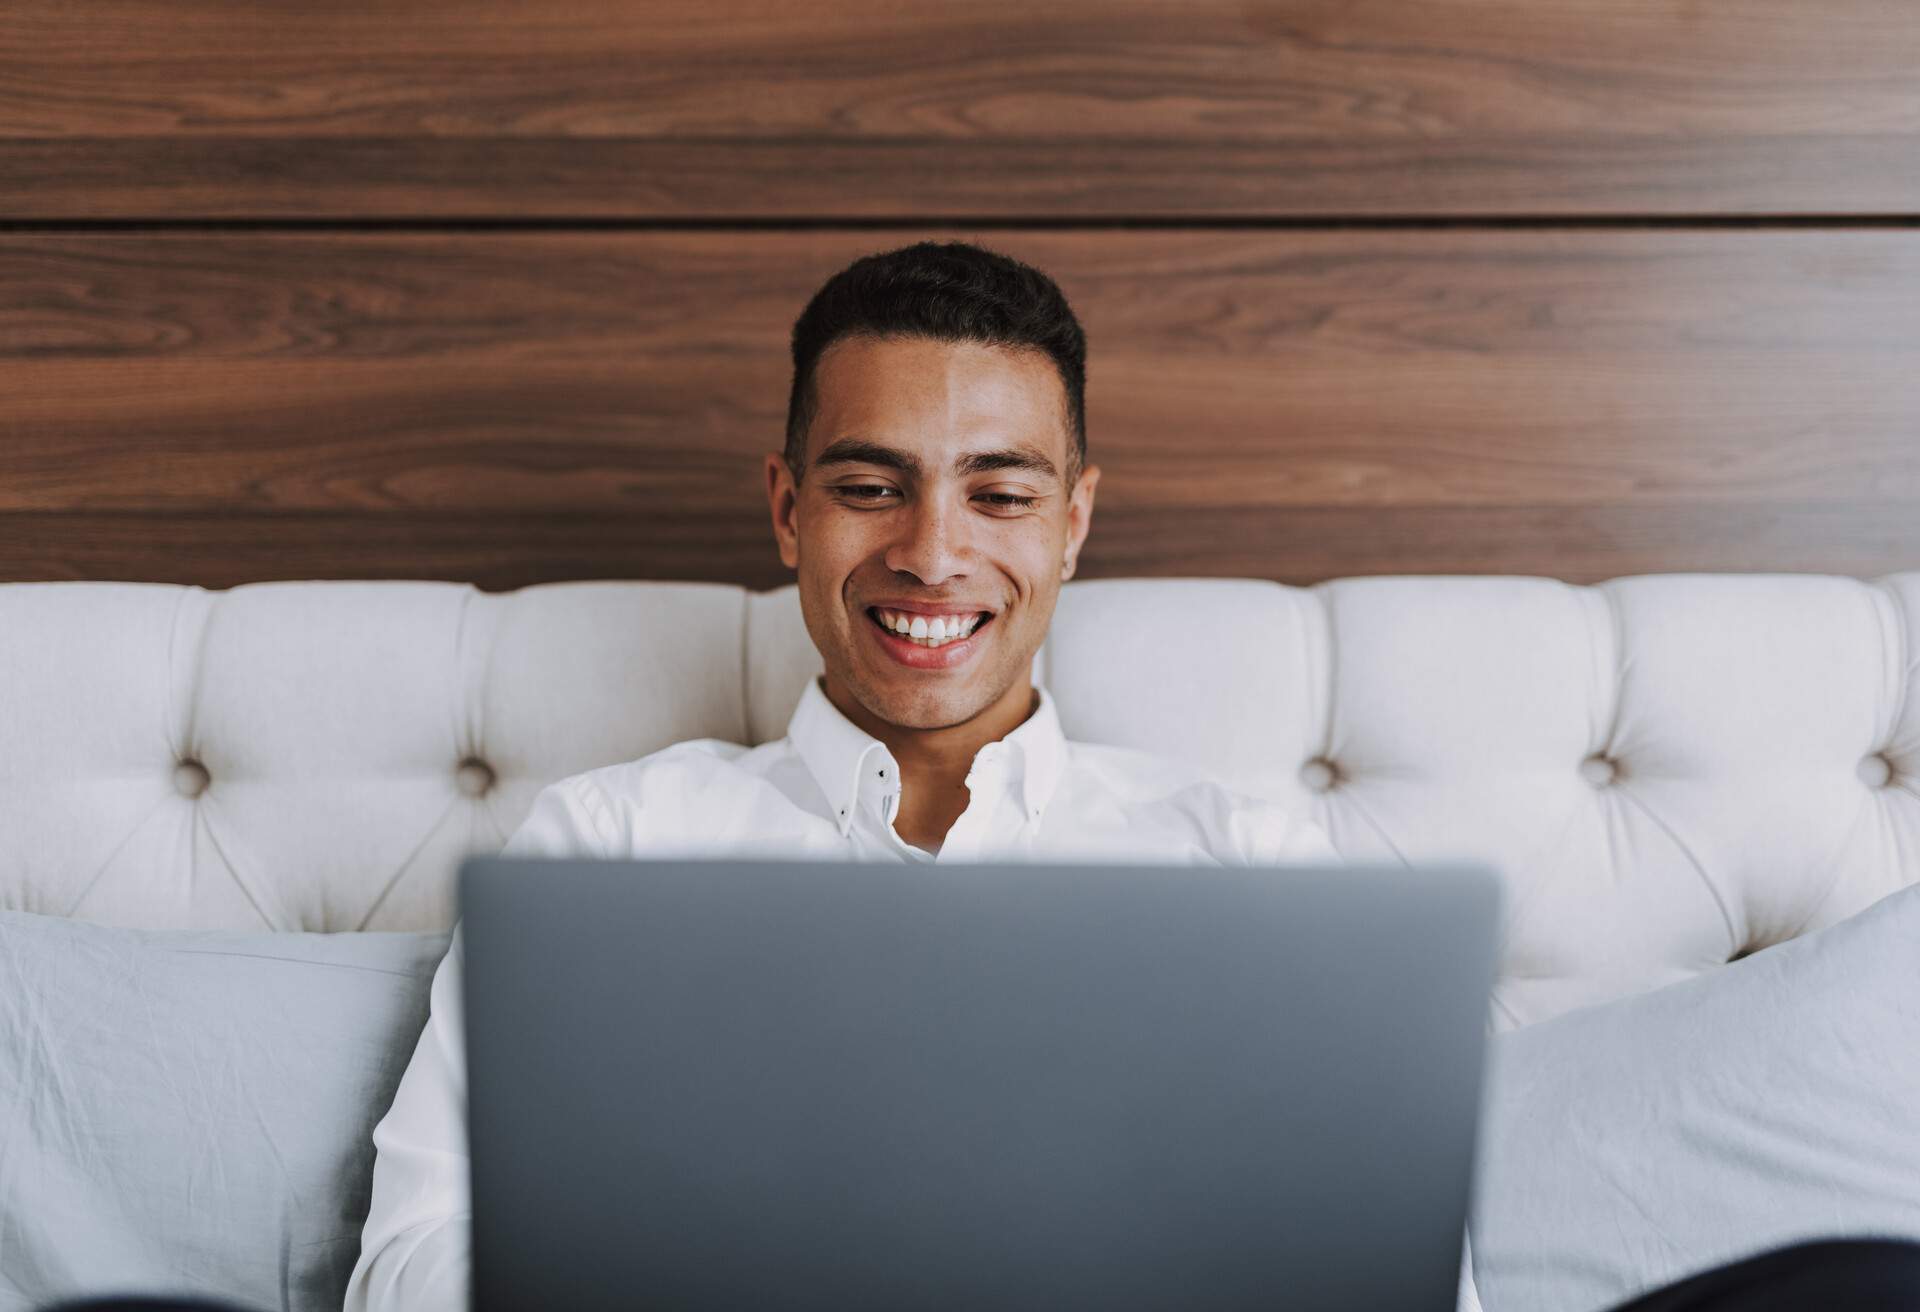 Focus on smiling handsome man relaxing on bedroom. He is holding laptop and looking at screen while networking.